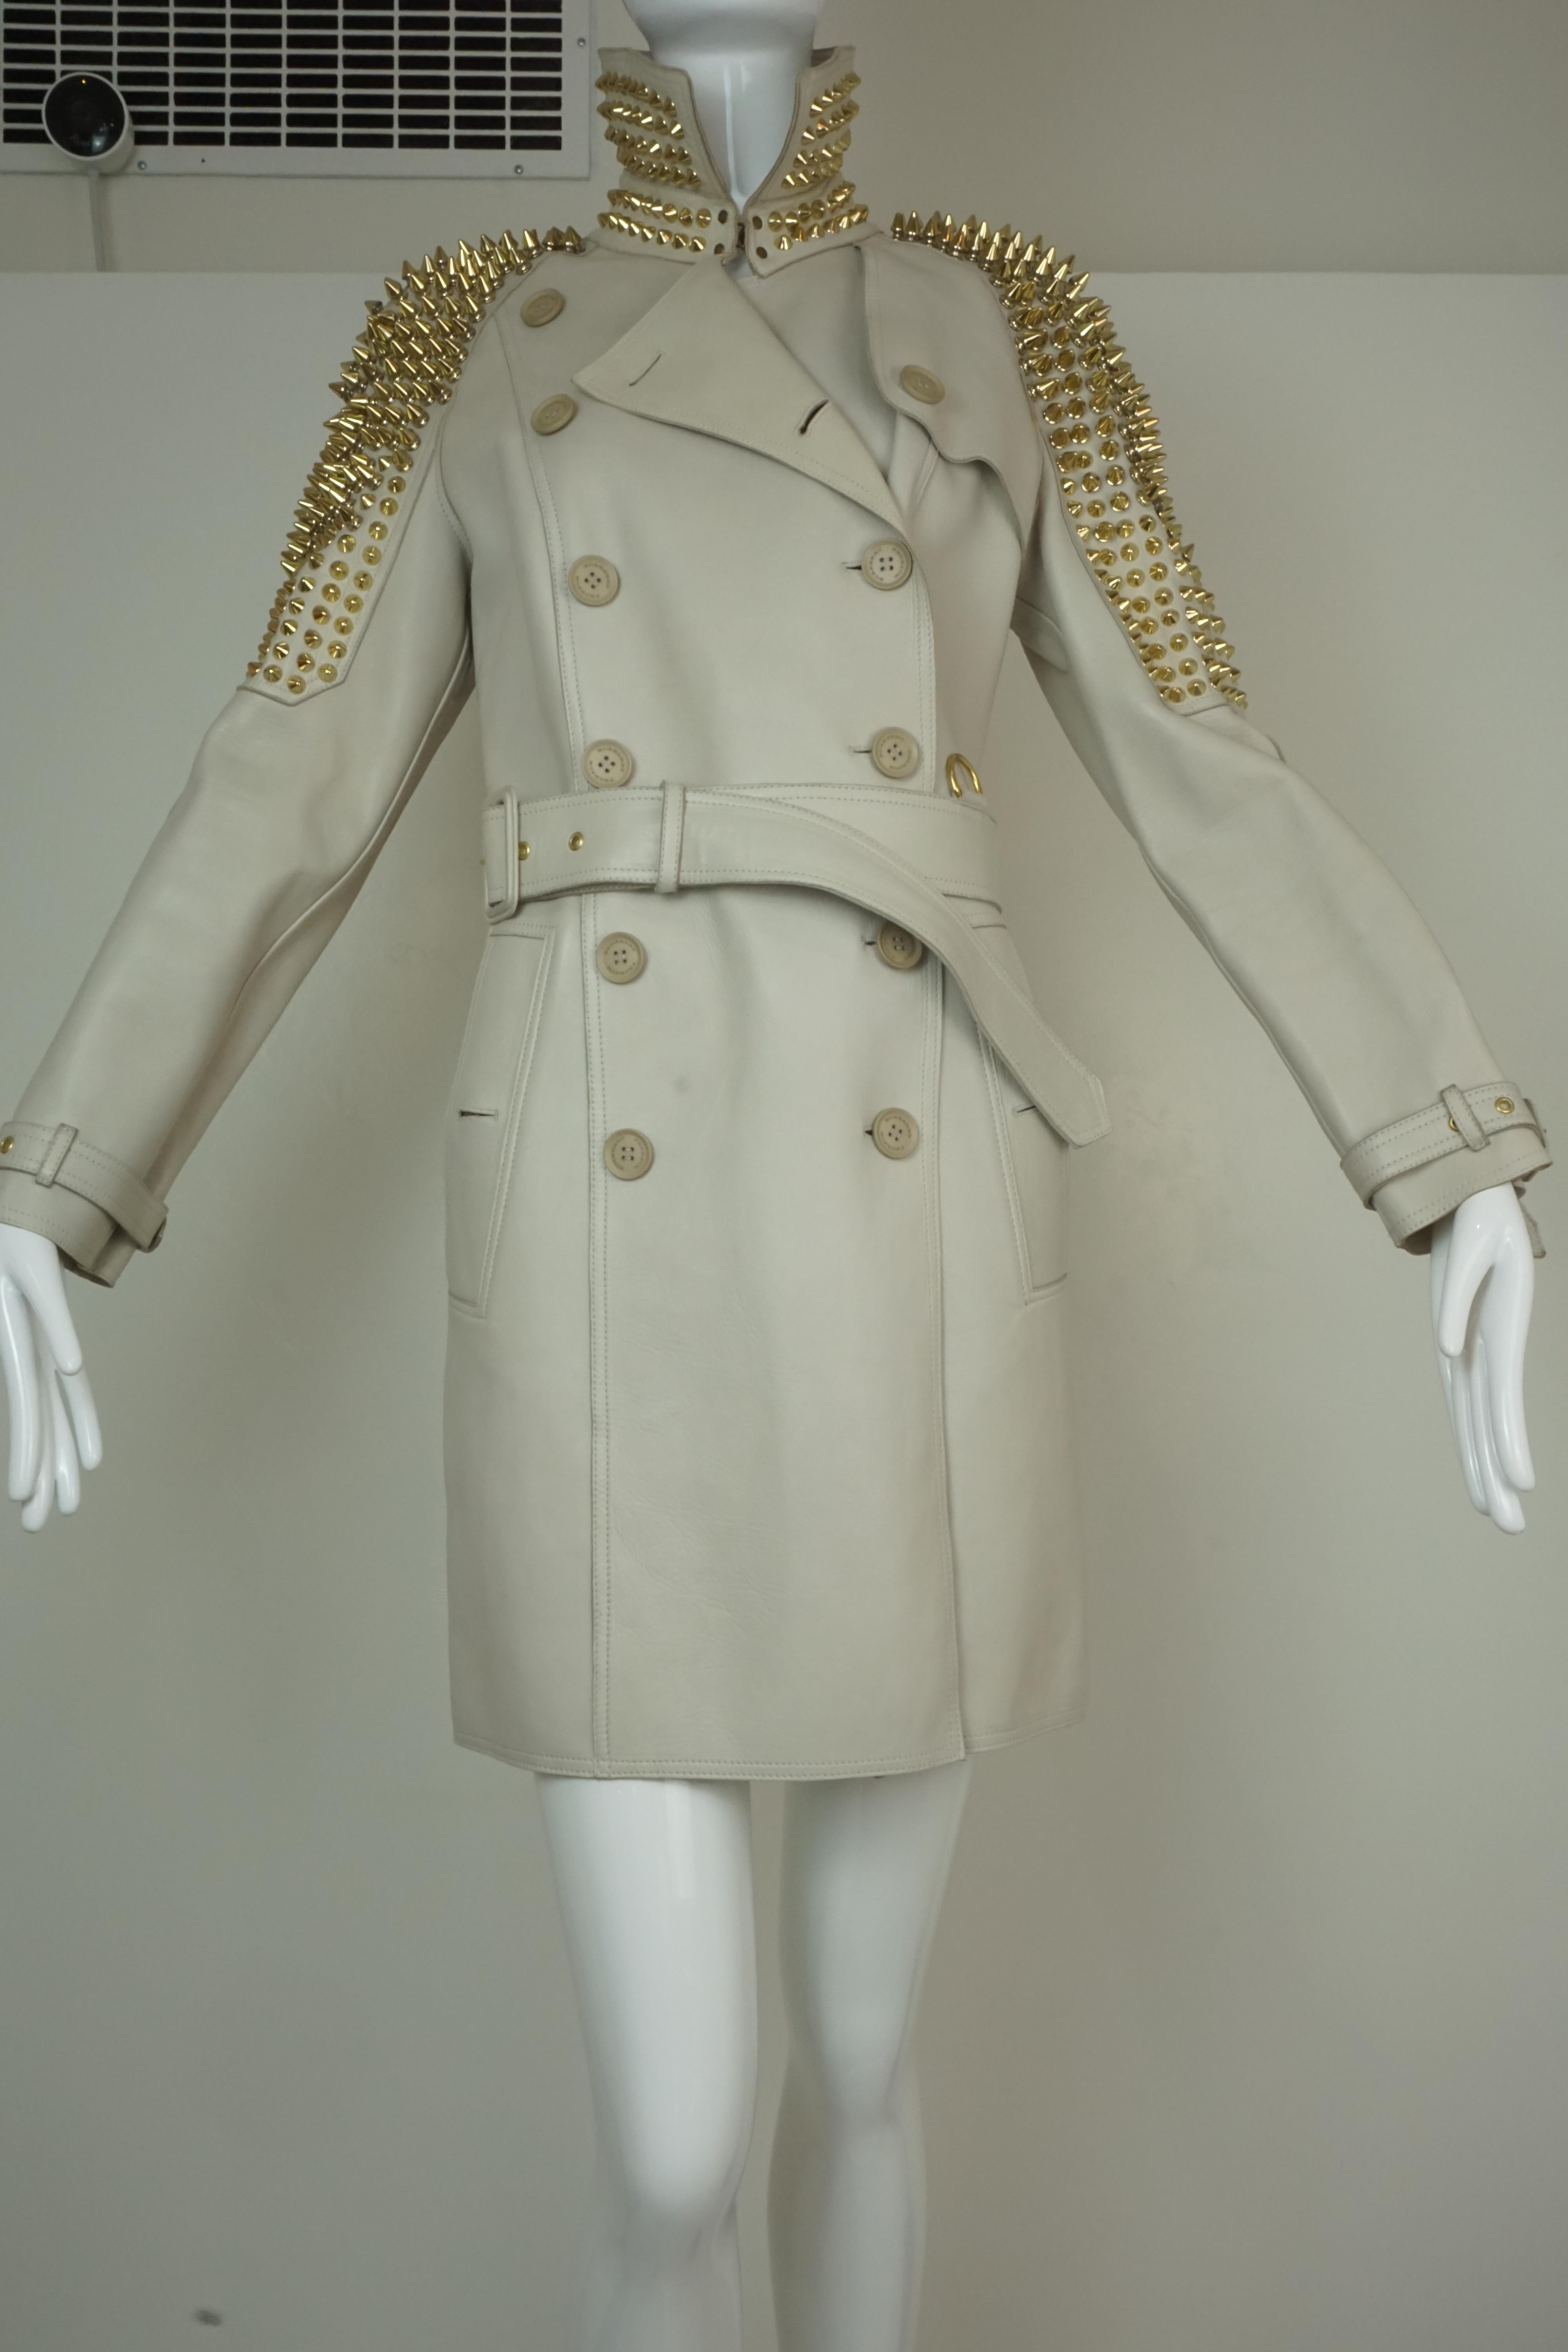 Burberry Prorsum belted trench coat in beige leather w/ gold spike punk rock studs on collar and sleeves. From Christopher Bailey's 2011 Biker collection. 

Foxy Couture is not an authorized reseller nor affiliated with any of the brands we